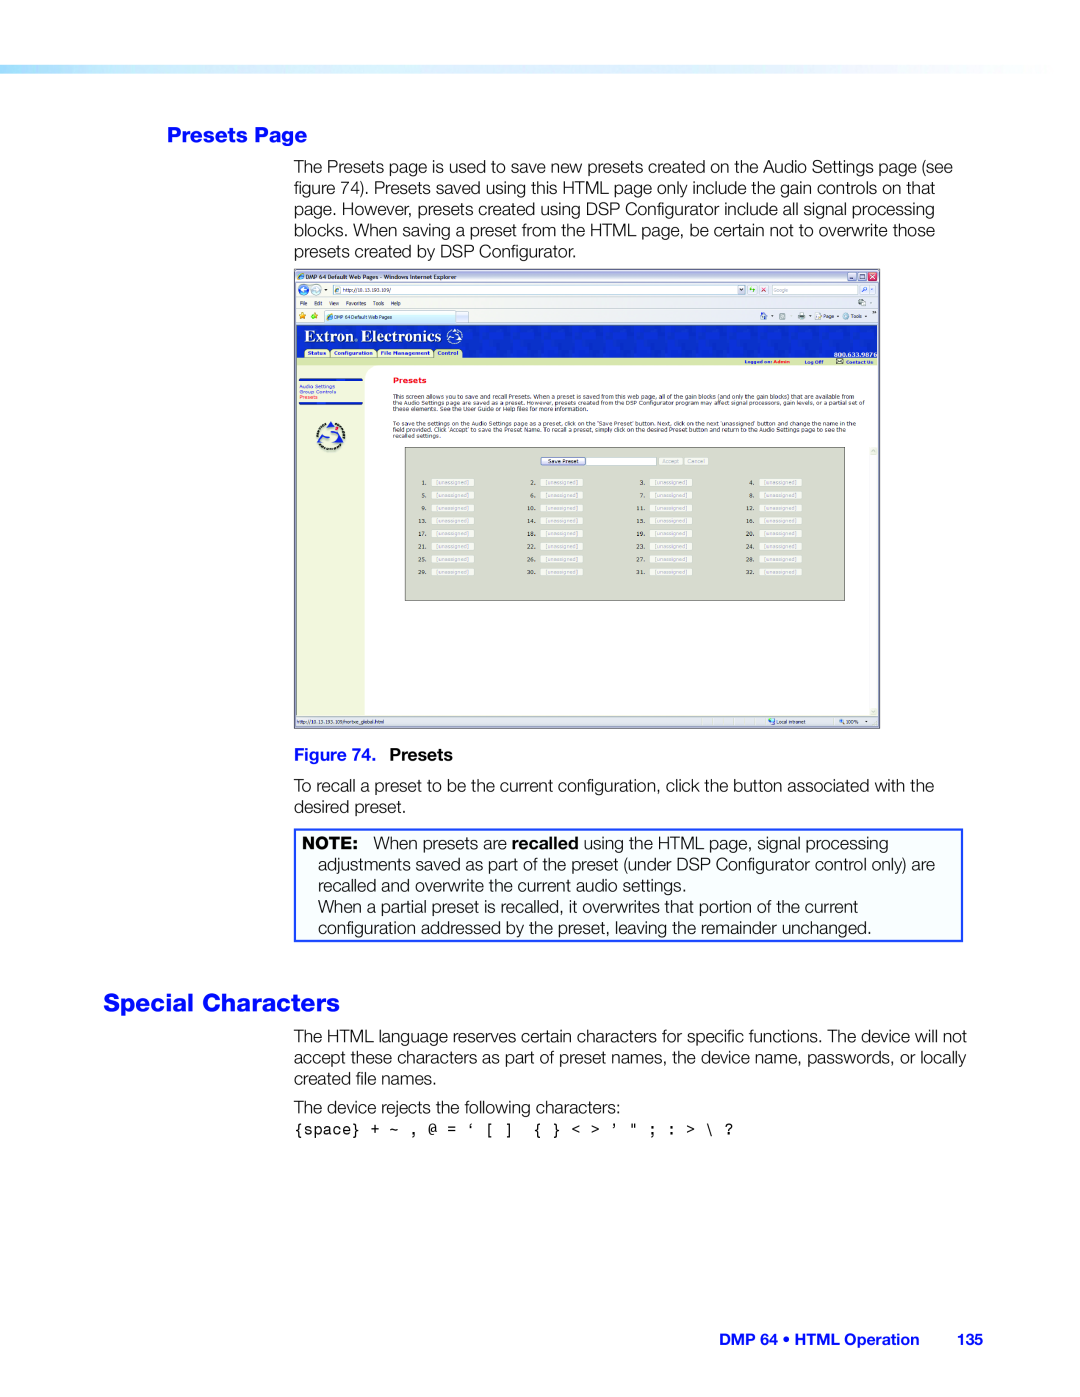 Extron electronic DMP 64 manual Presets Page, Special Characters 